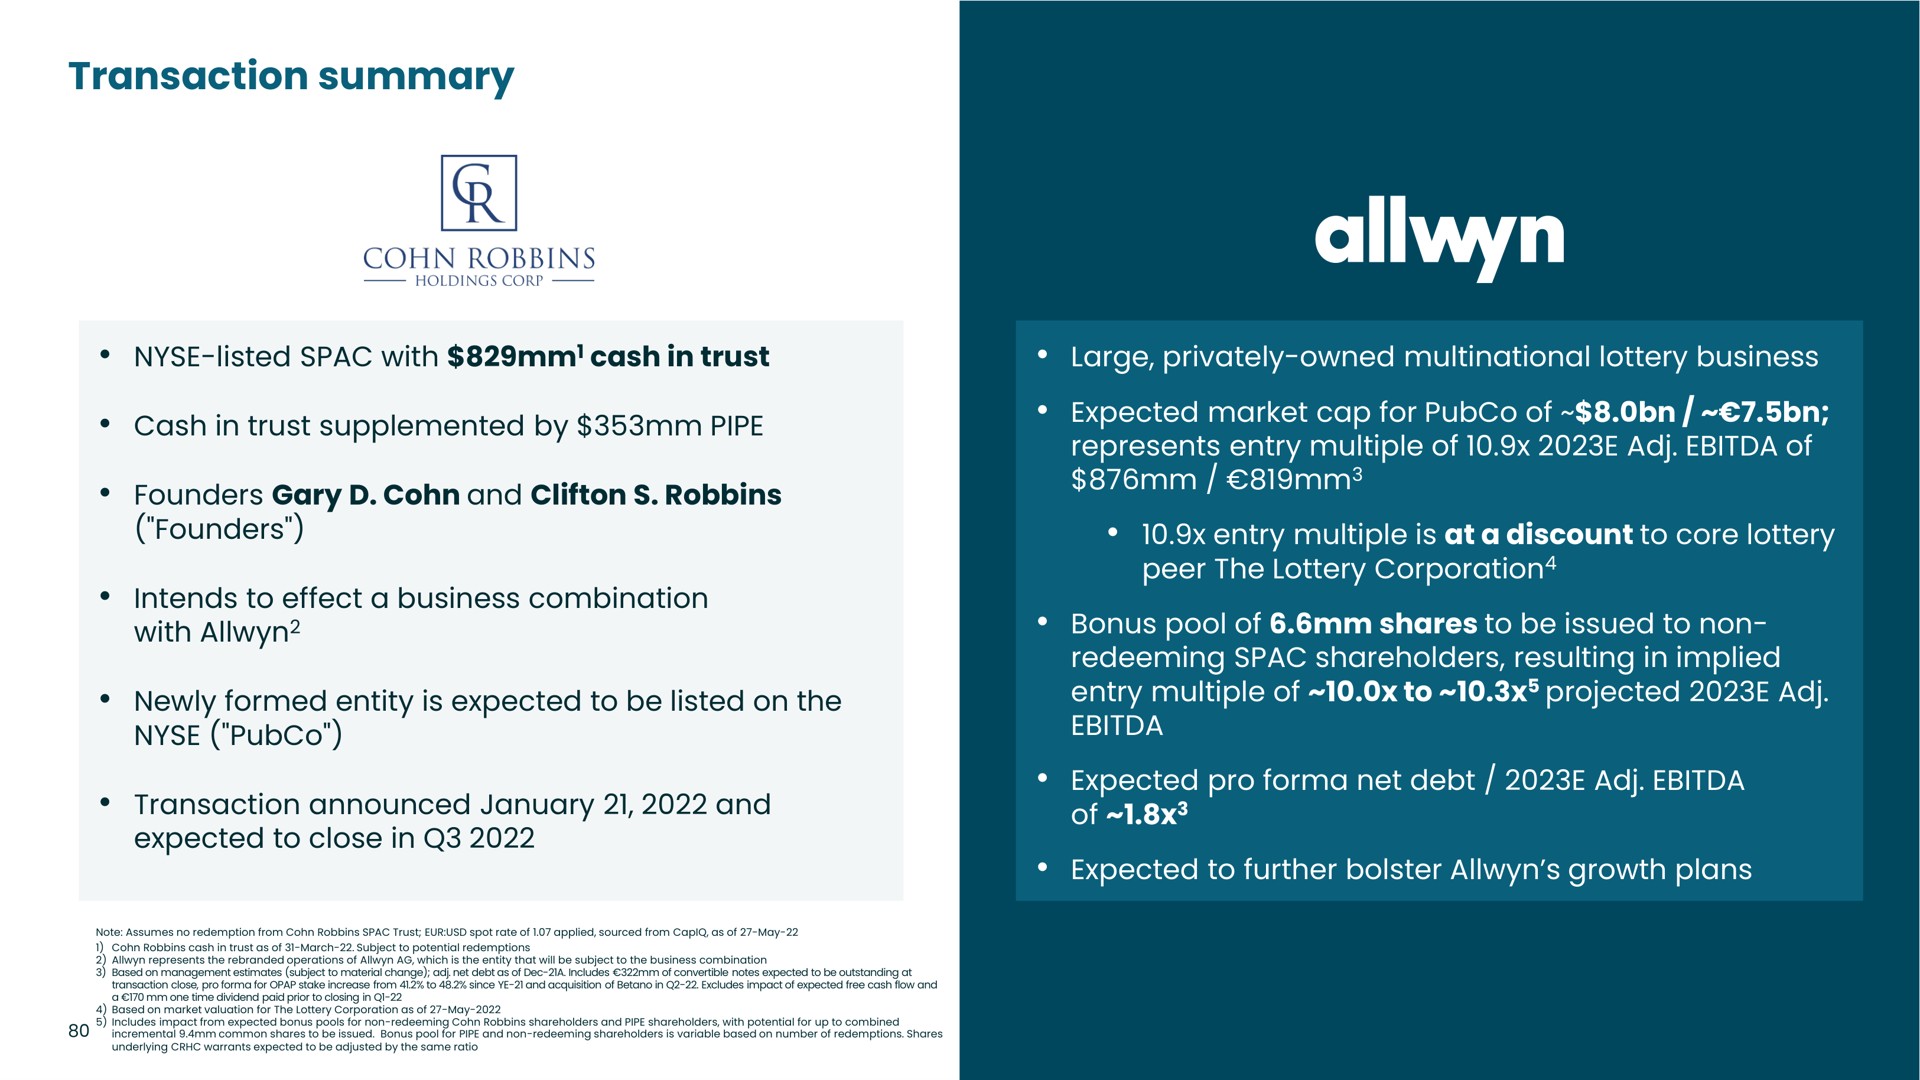 transaction summary founders entry multiple is at a discount to core lottery | Allwyn